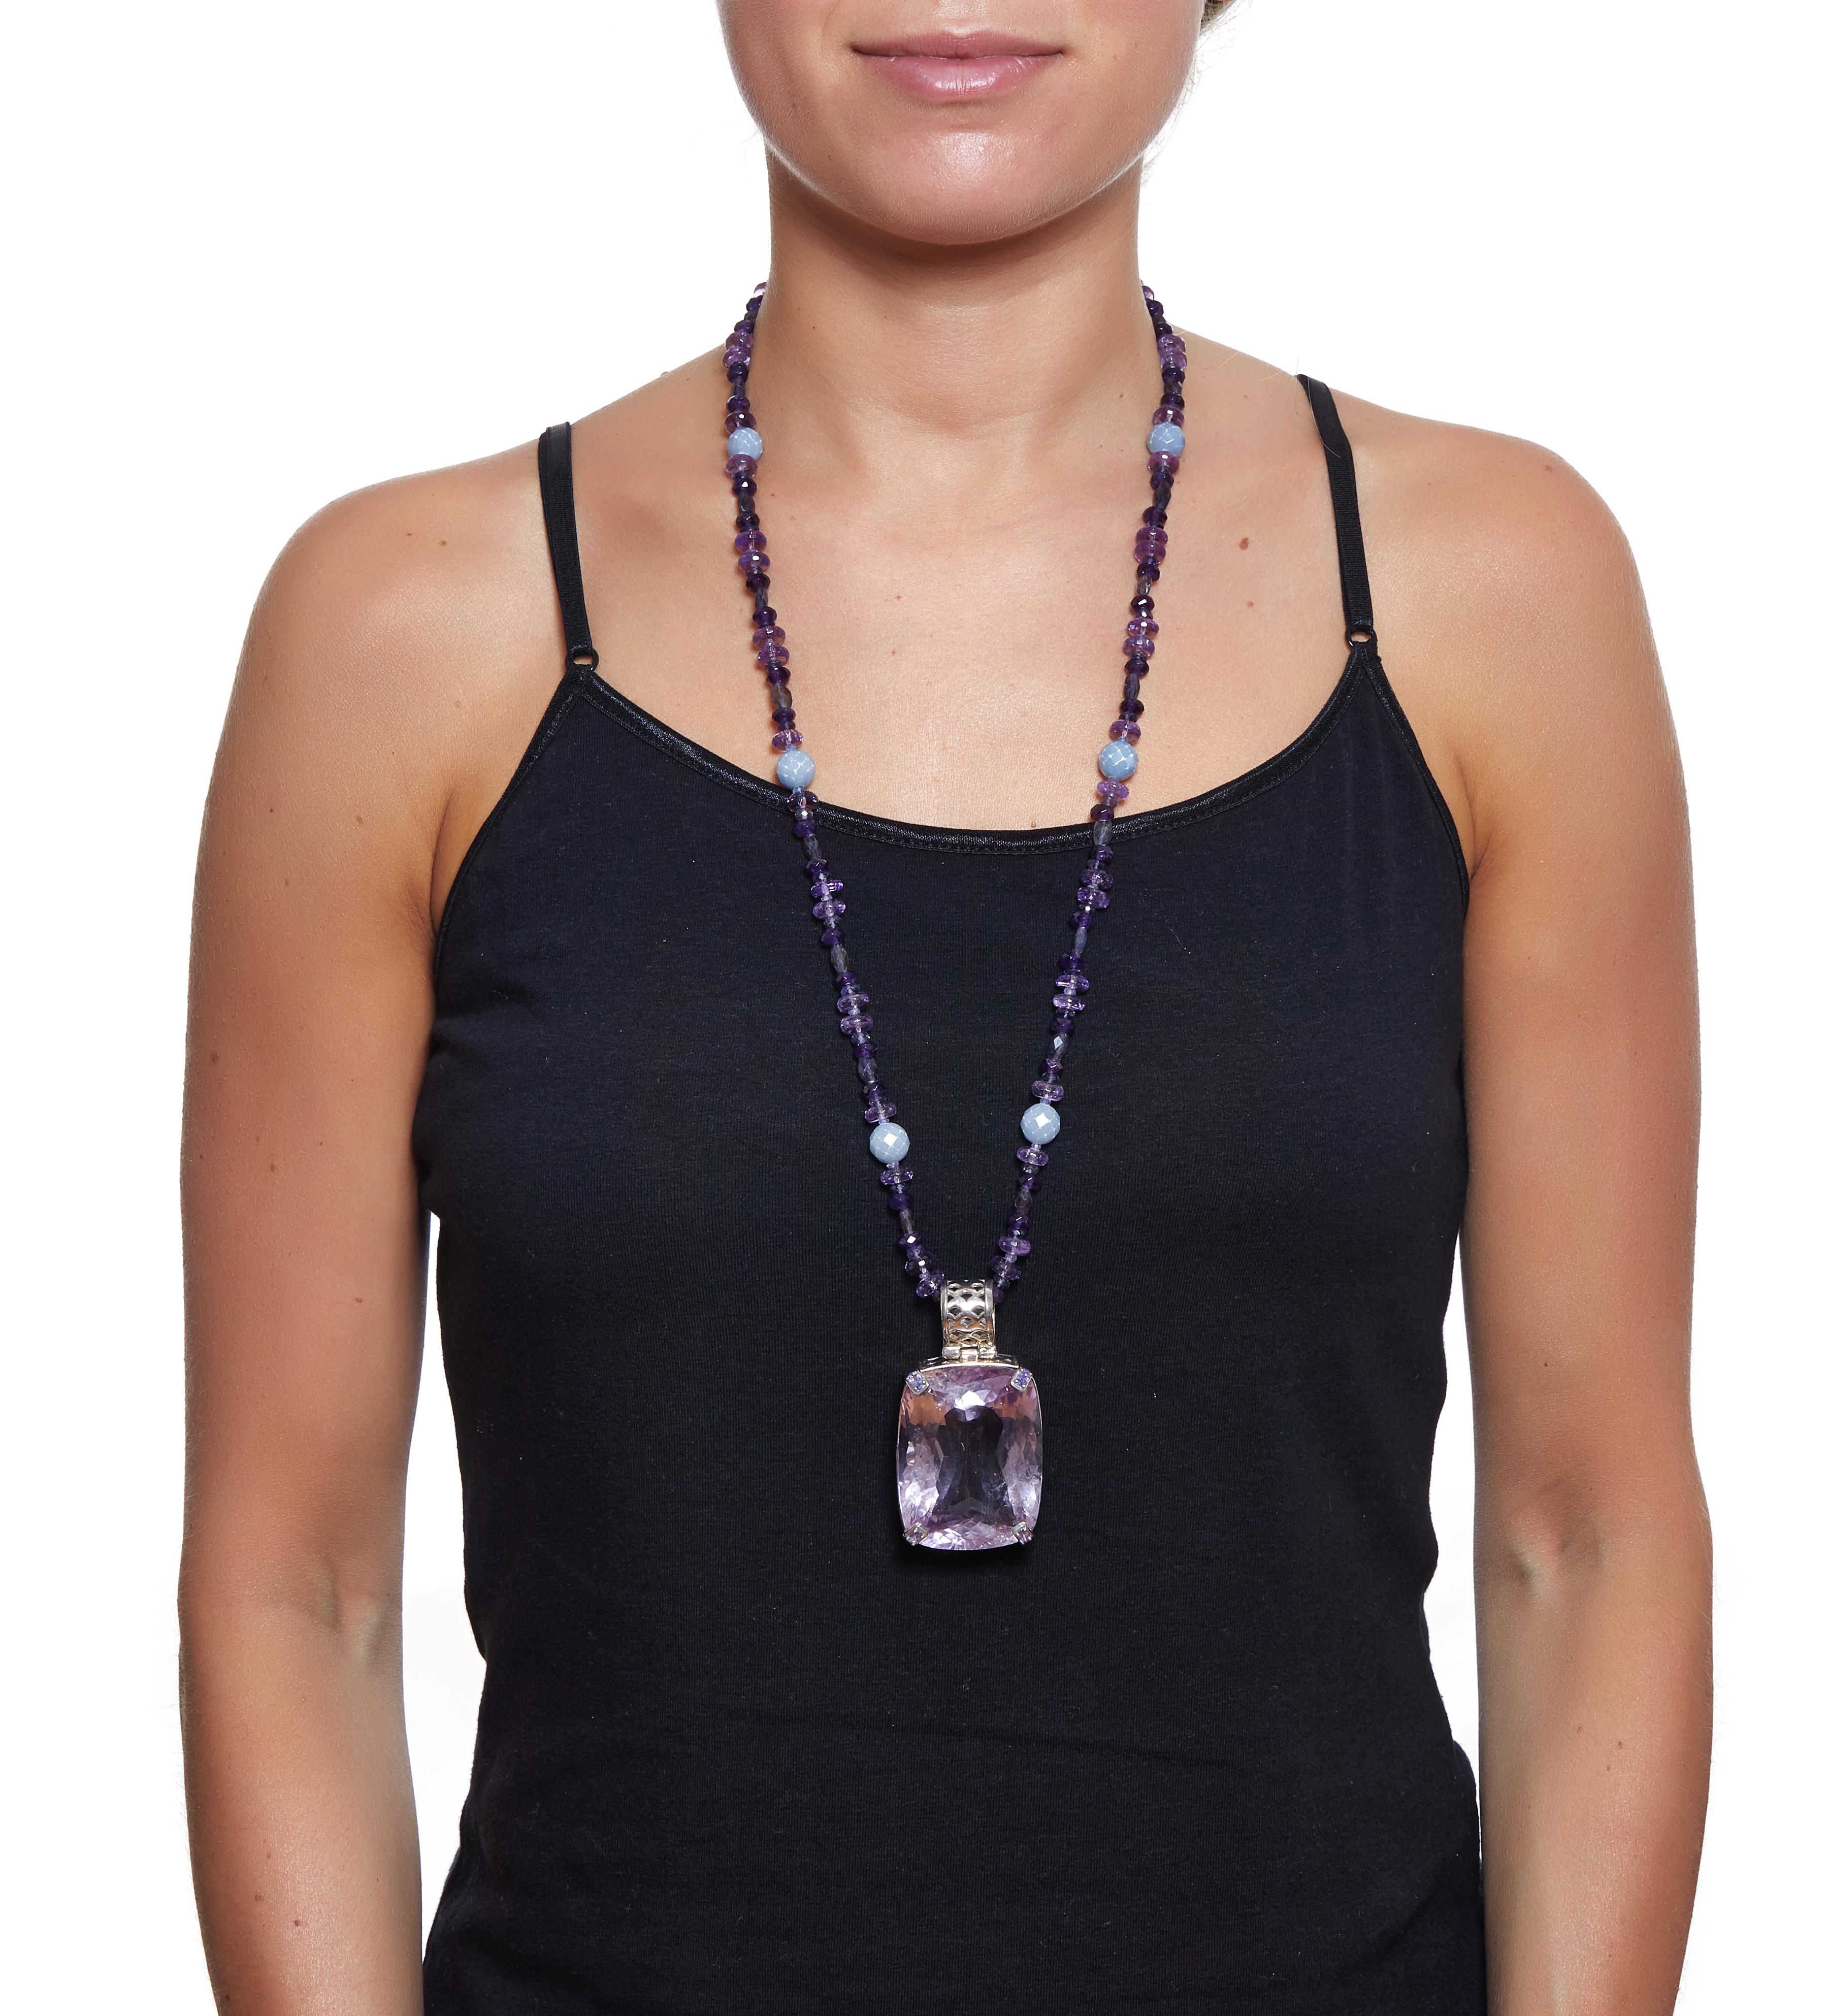 One of a Kind Handmade Pendant Necklace
Sabrina Balsky Jewelry
257.55 carats Natural Amethyst very clean stone set with Tanzanite set prong detail with signature design on bail and around stone.  Rhodium plated Sterling size of Pendant is 2-9/16